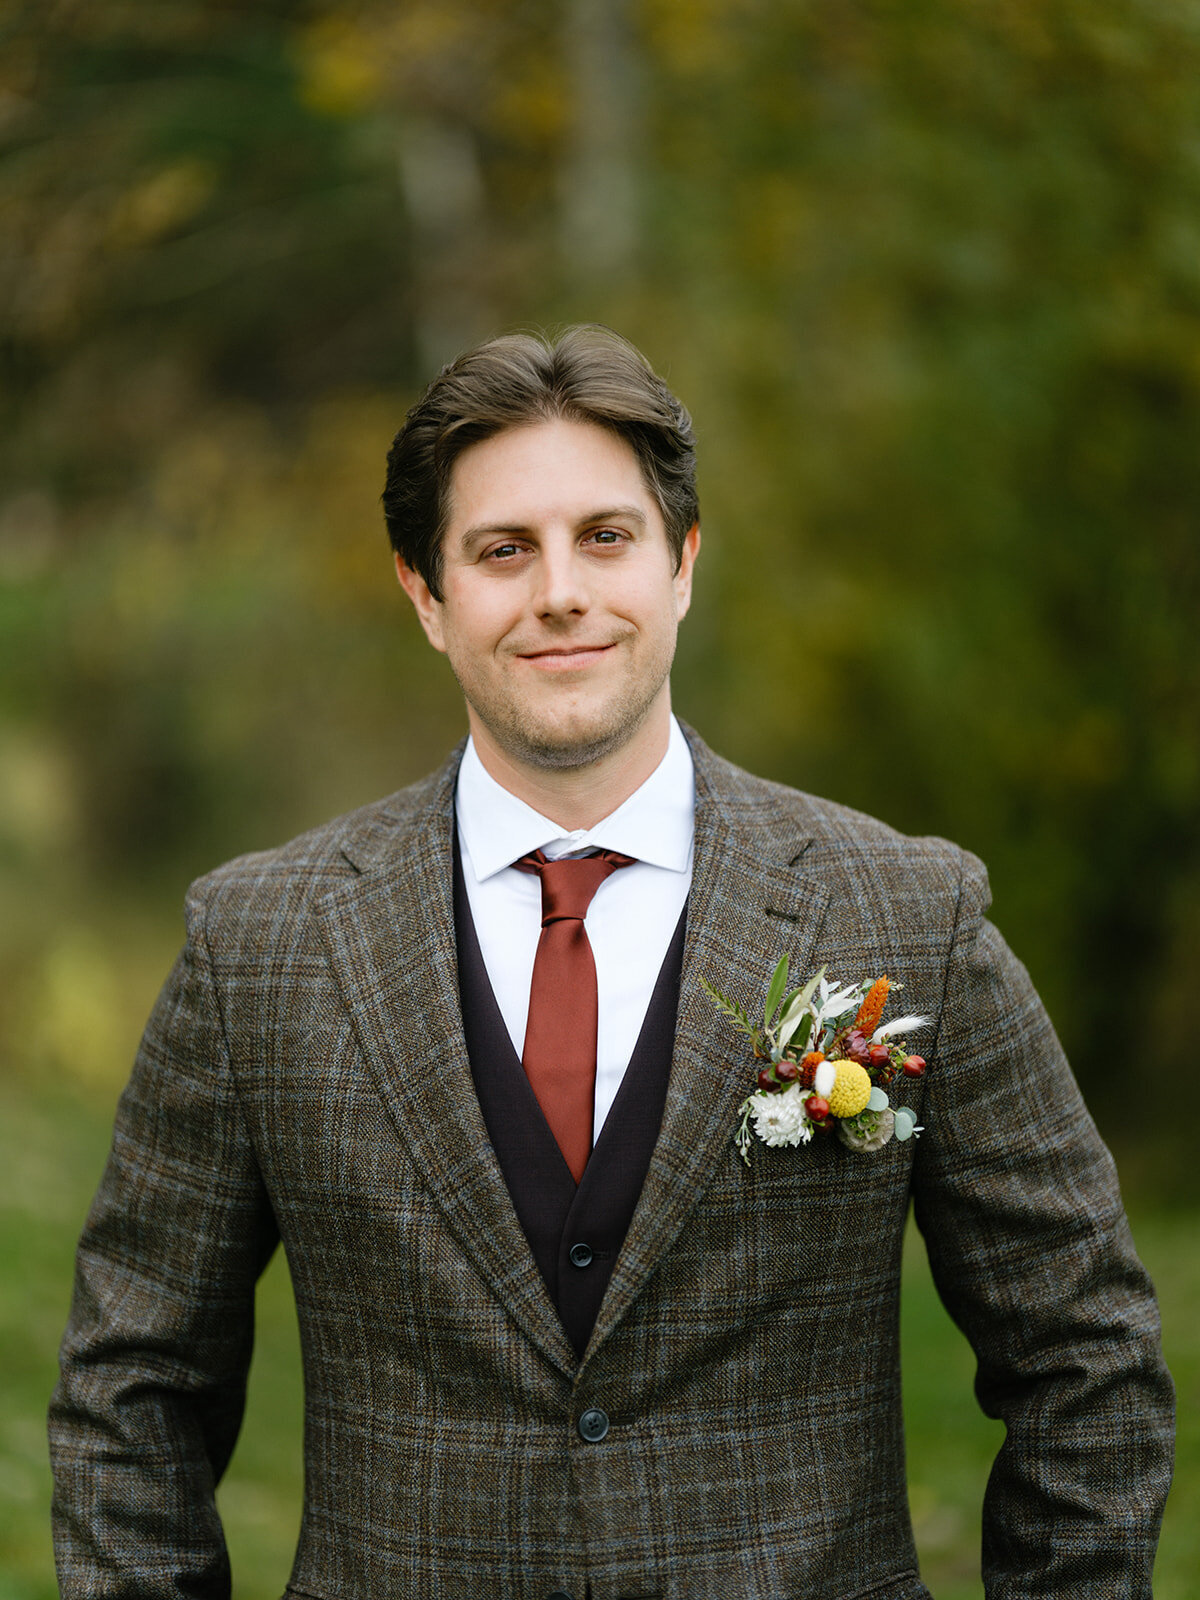 Pocket square boutonniere with mixed fall texures on tweed jacket